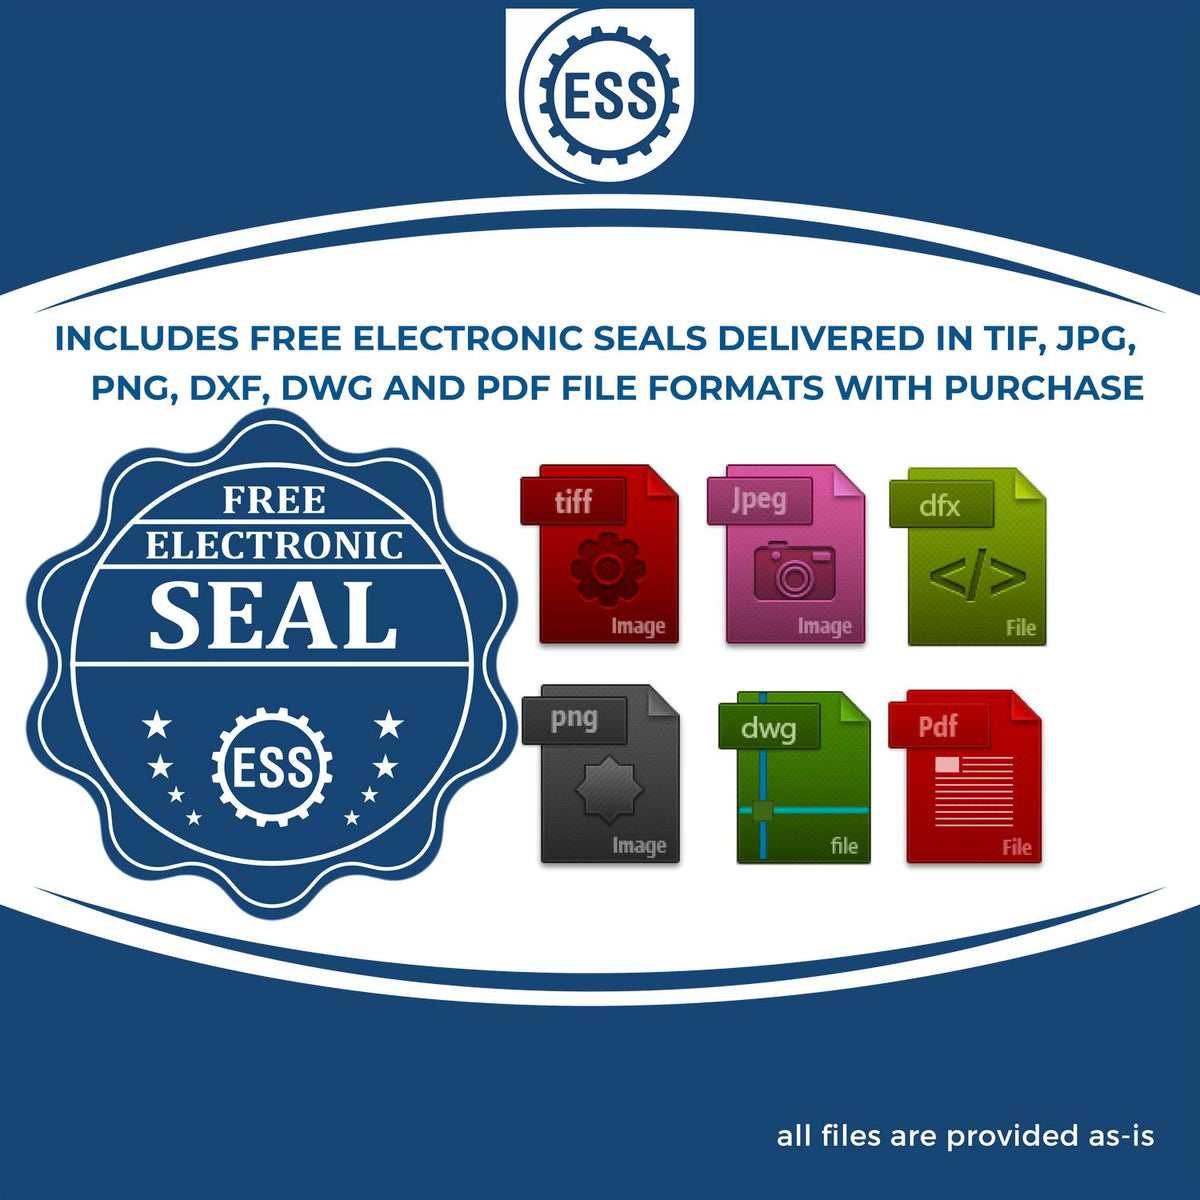 An infographic for the free electronic seal for the PSI Nebraska Notary Stamp illustrating the different file type icons such as DXF, DWG, TIF, JPG and PNG.